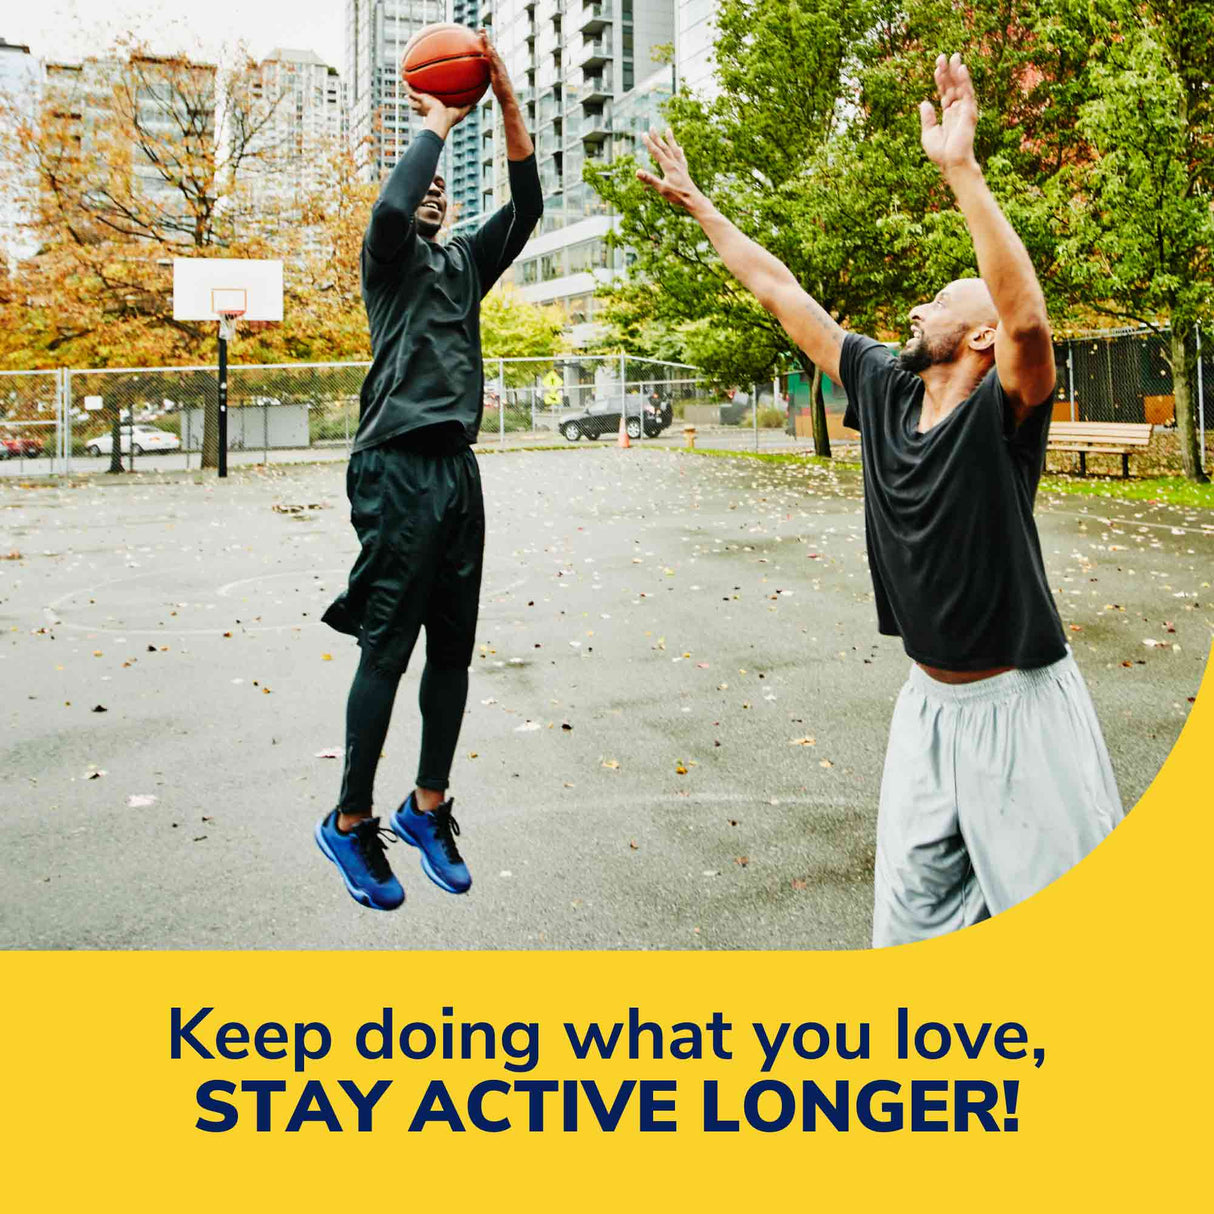 image of keep doing what you love, stay active longer